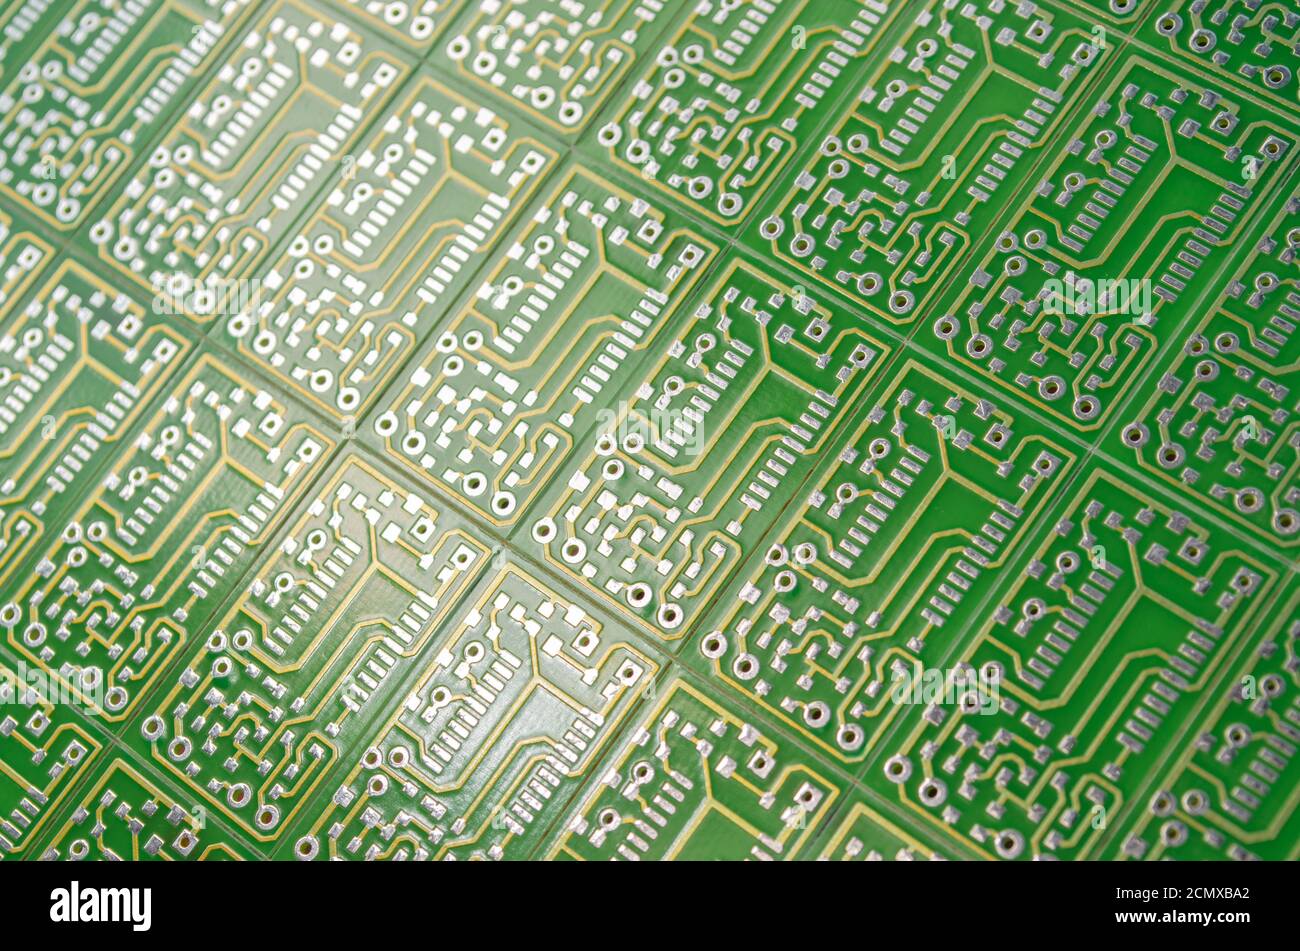 Close-up of a green electronic circuit boards positioned diagonally as a background, selective focus. Concept for development of electronic circuits Stock Photo